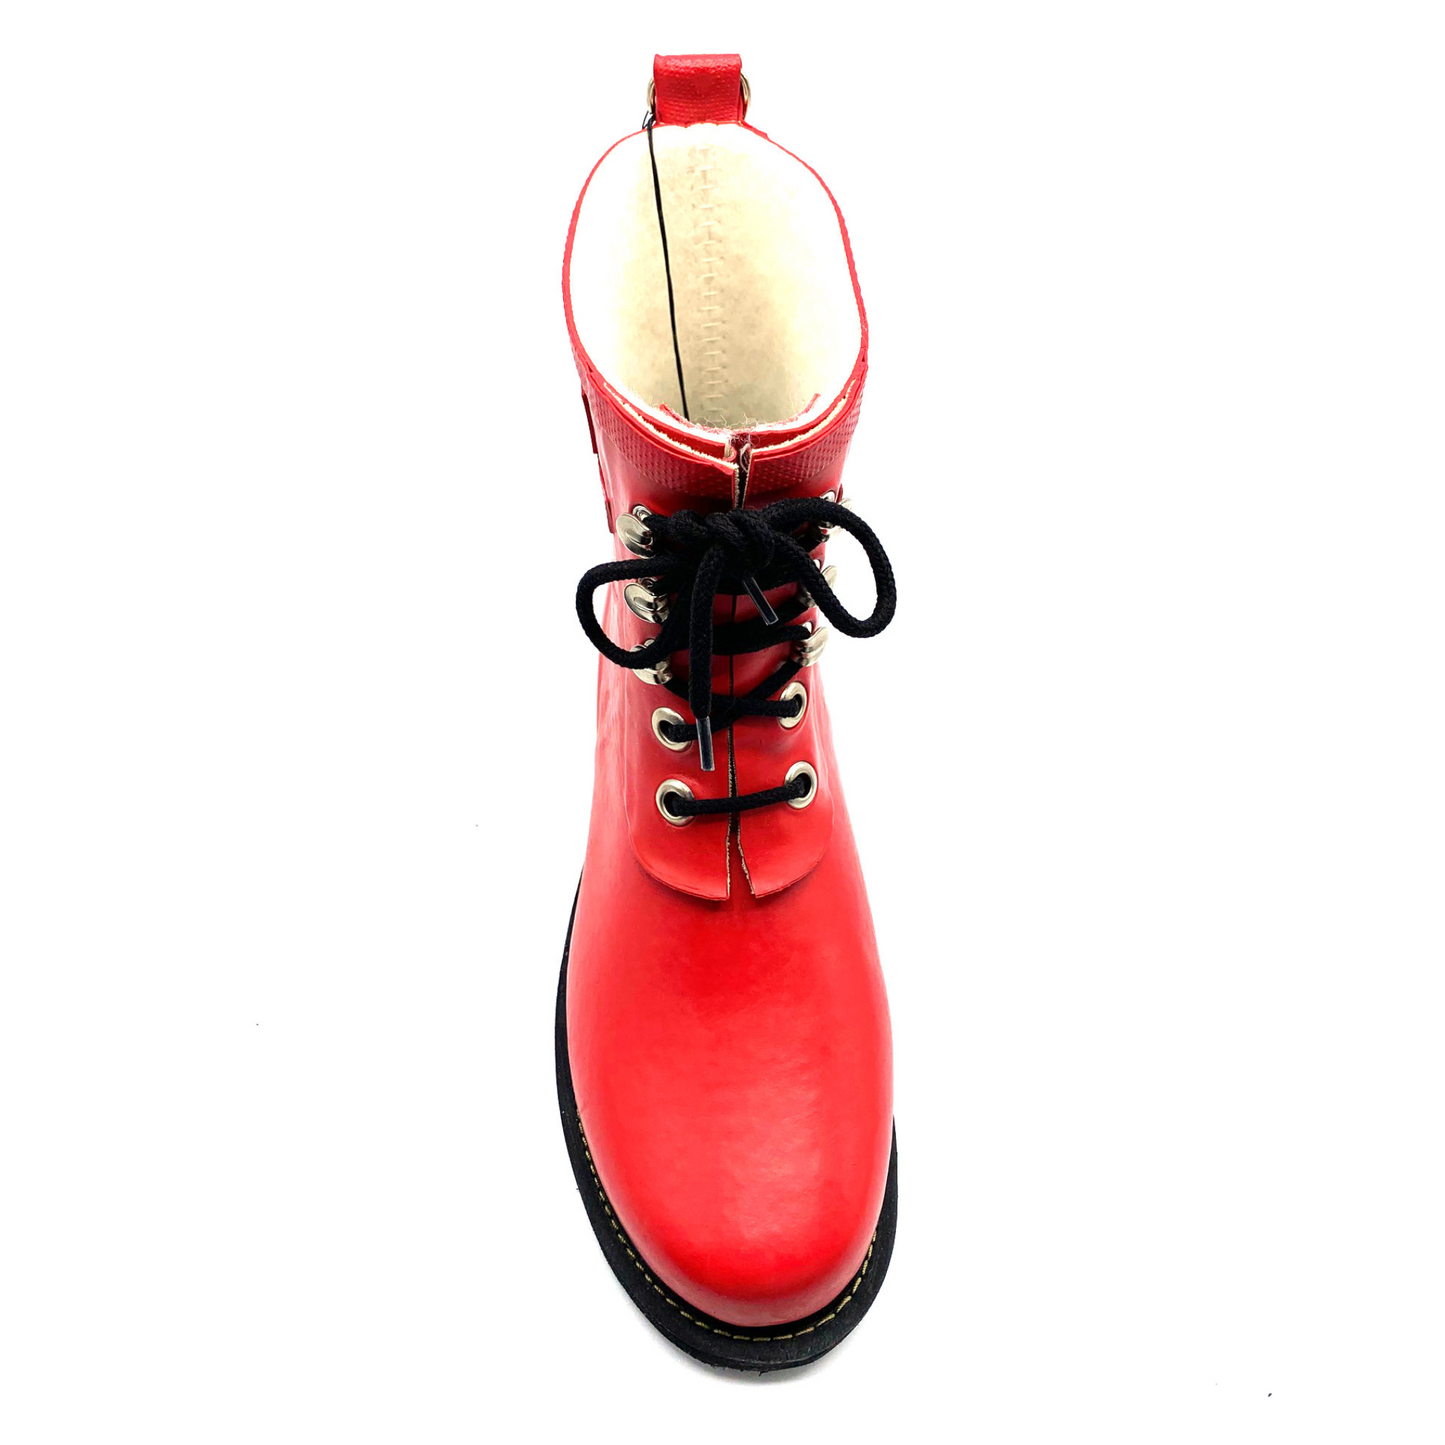 A front view of a red rainboot with black details.